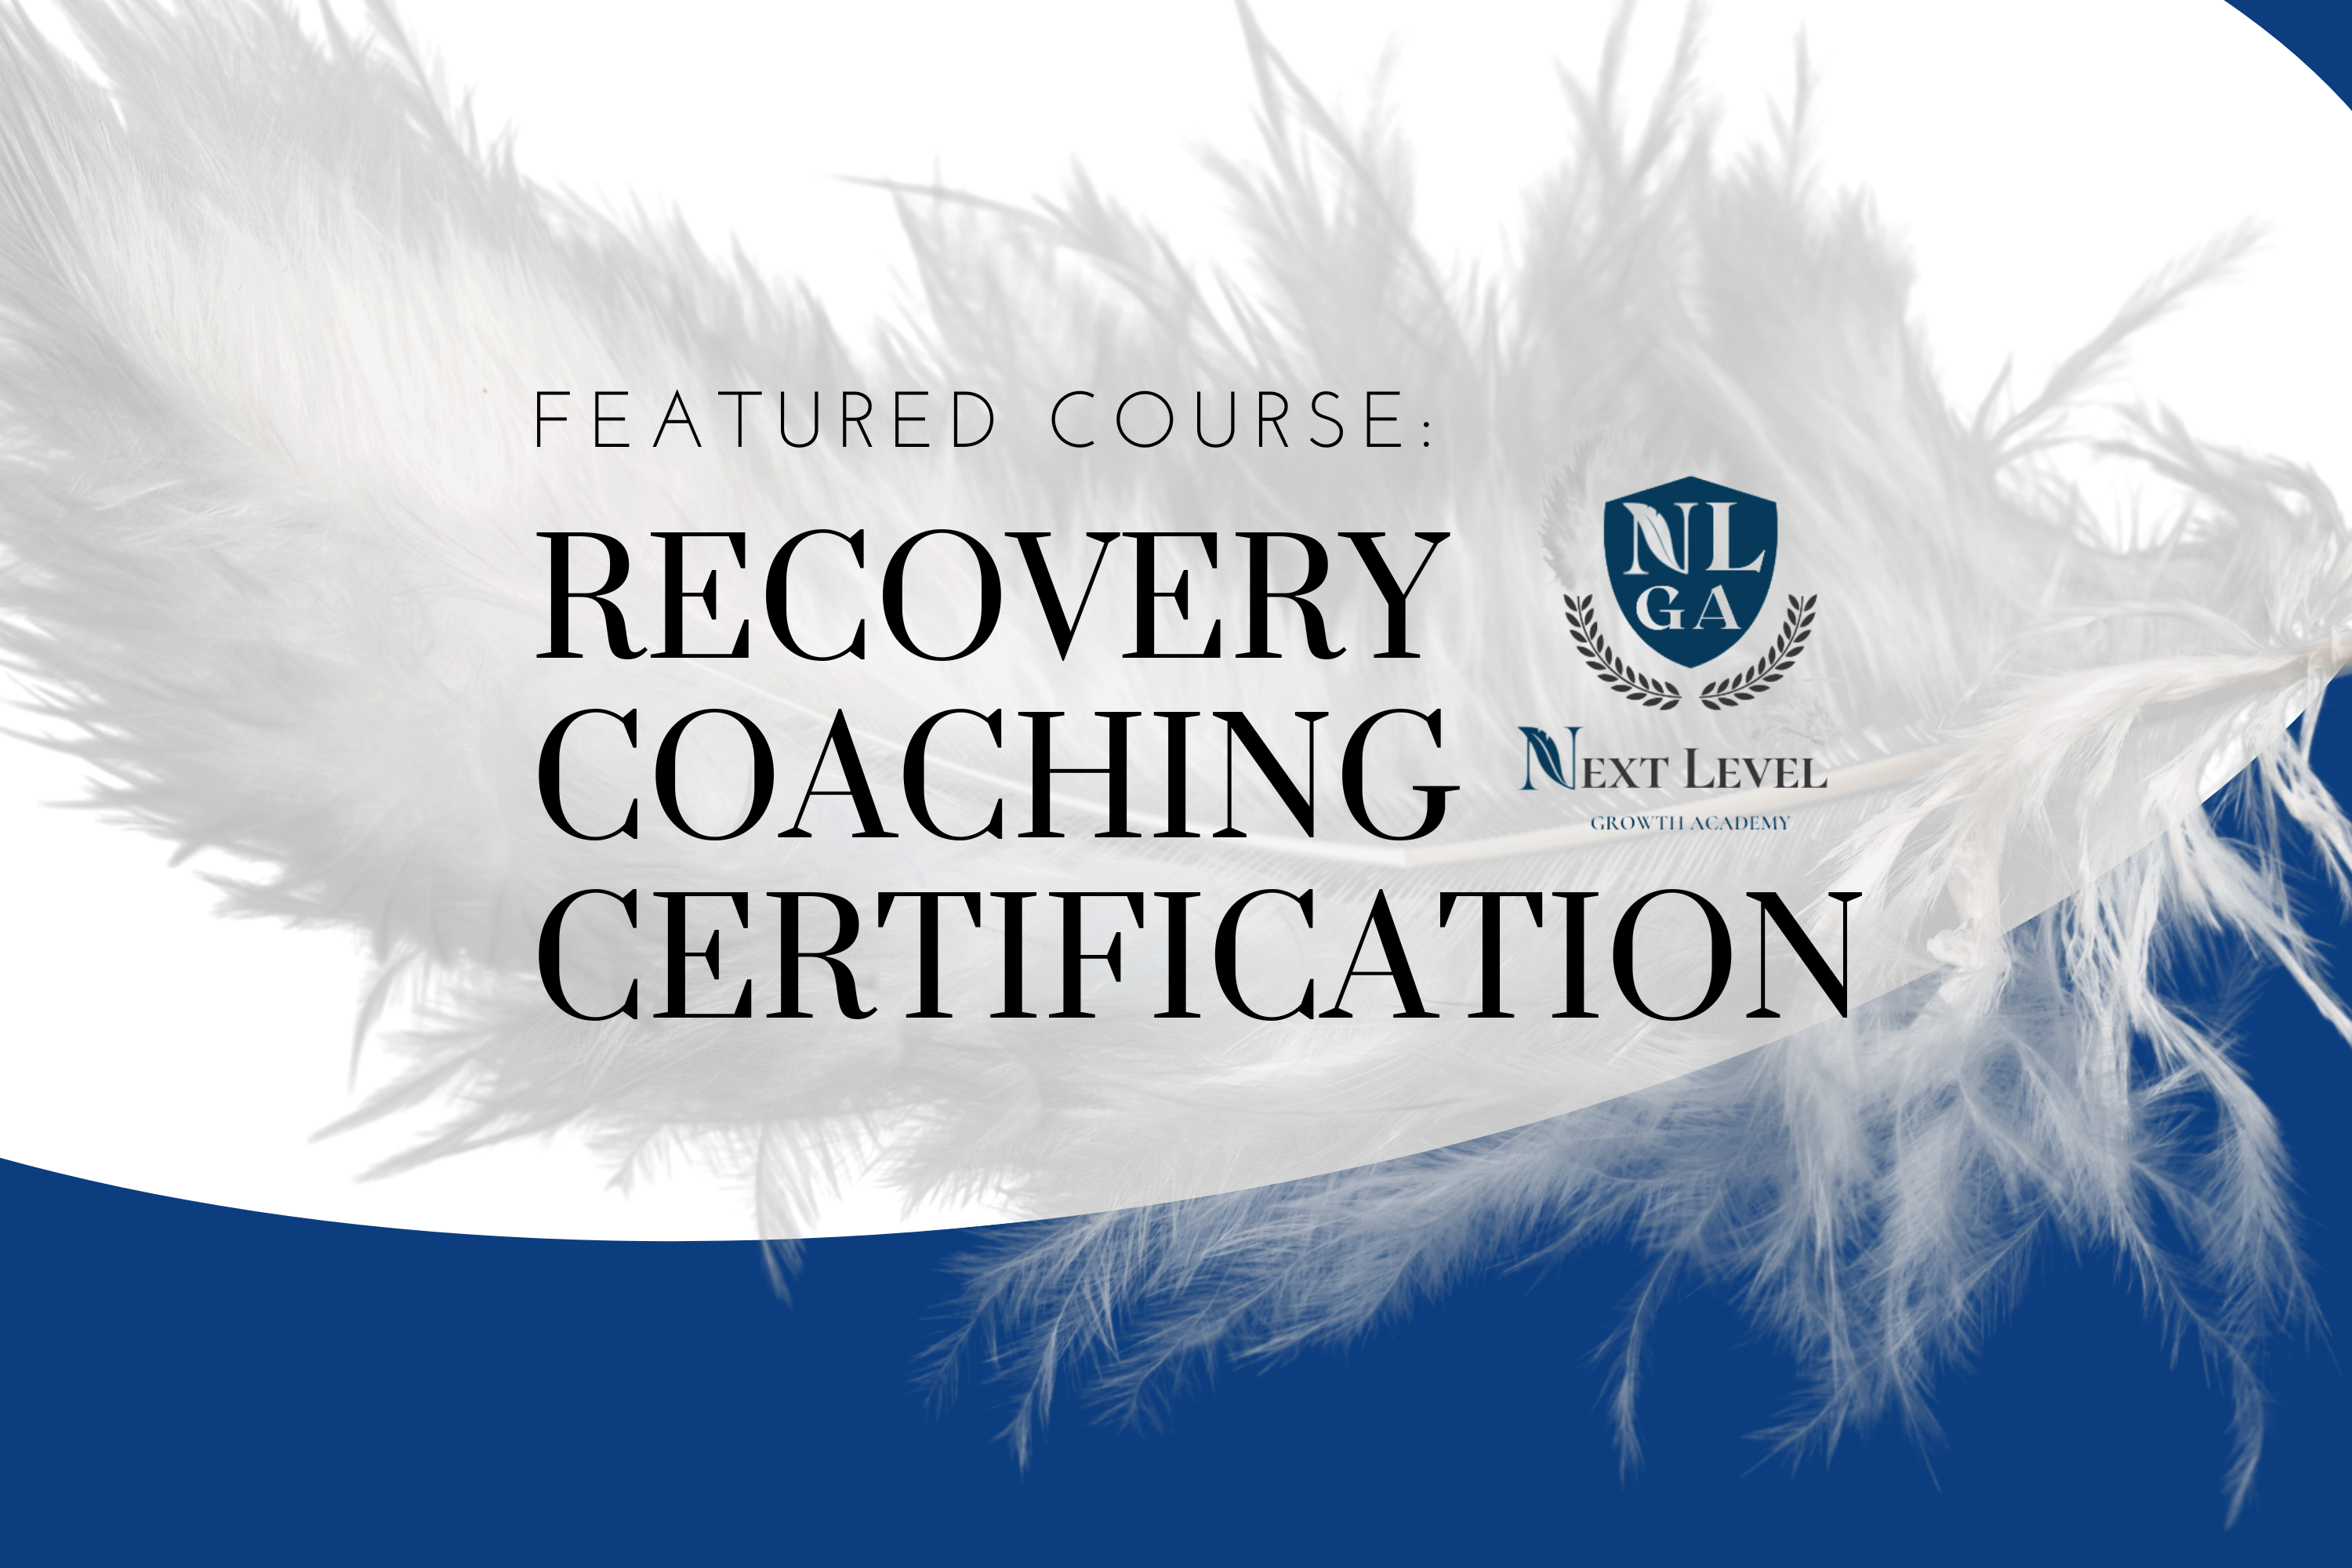 Recovery Coaching Certification with Next Level Growth Academy